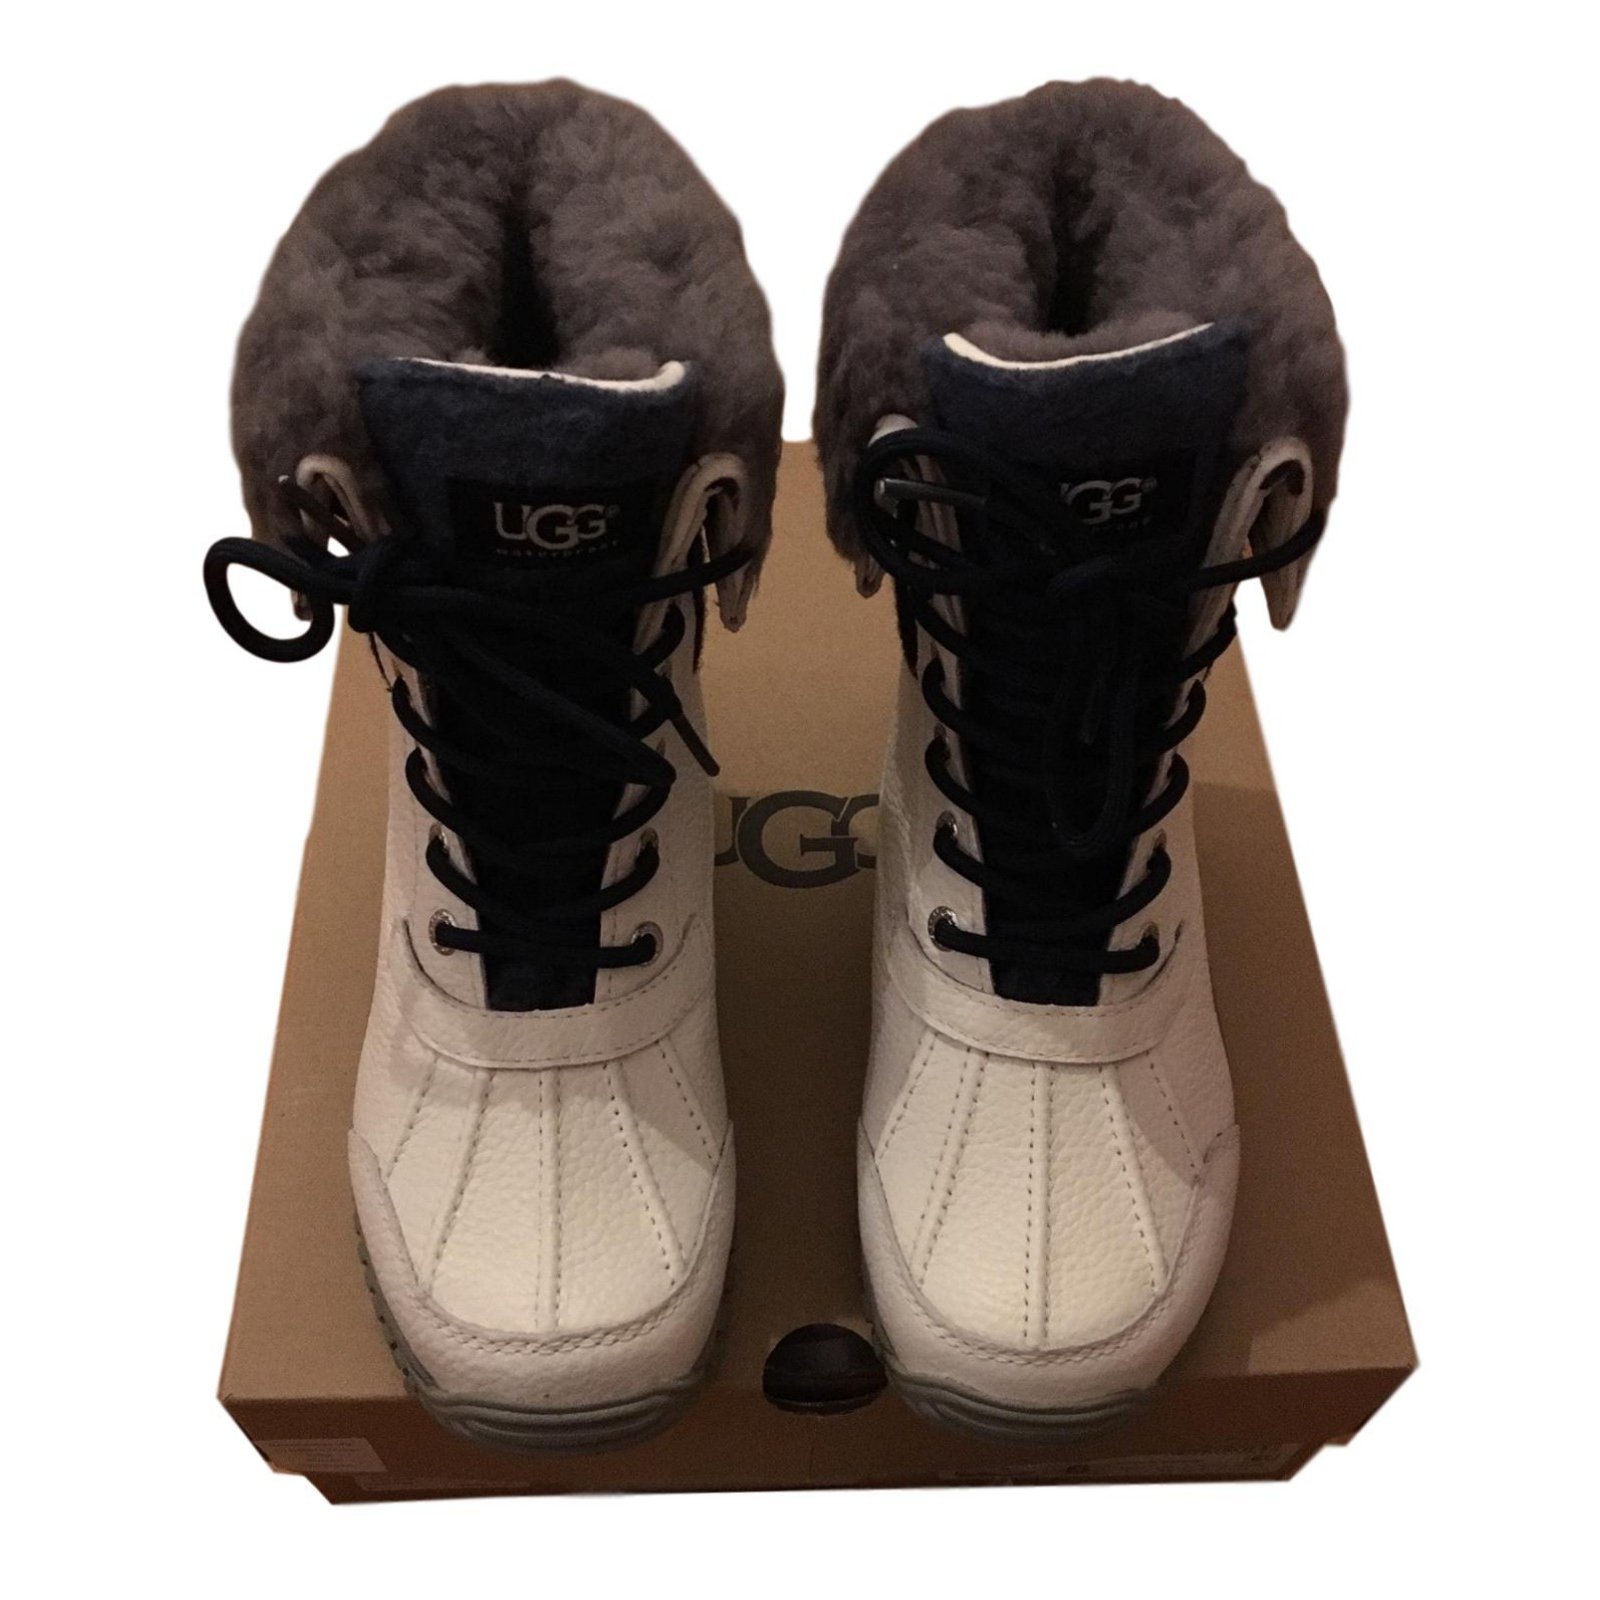 white leather ugg boots